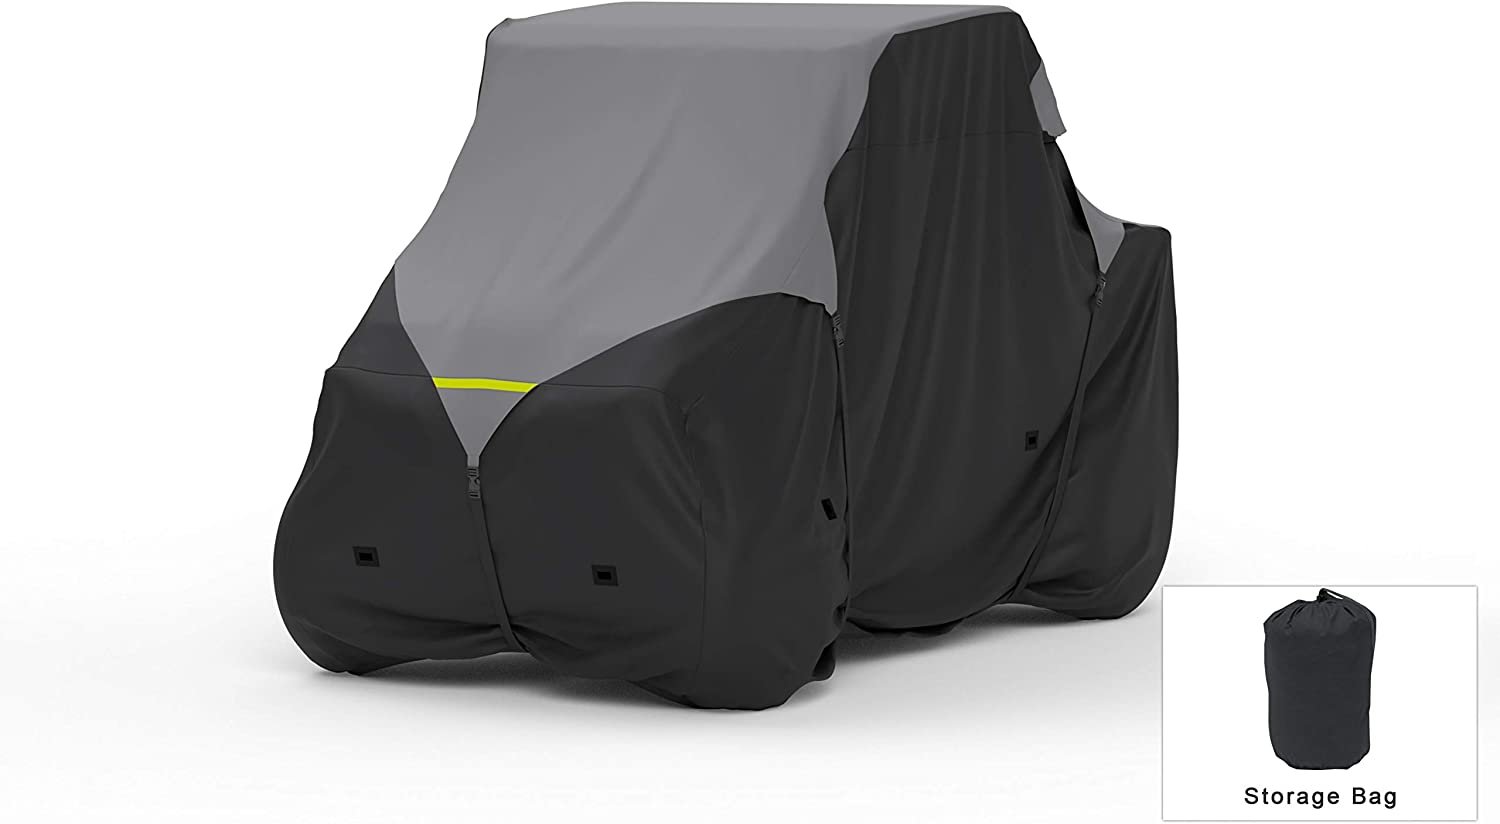 Weatherproof UTV Cover Compatible with 2003 Kawasaki Kaf620-f3 Mule 3020  Outdoor  Indoor Water, Snow, Sun Built-in Securing Straps  Trailerable Includes Free Storage Bag